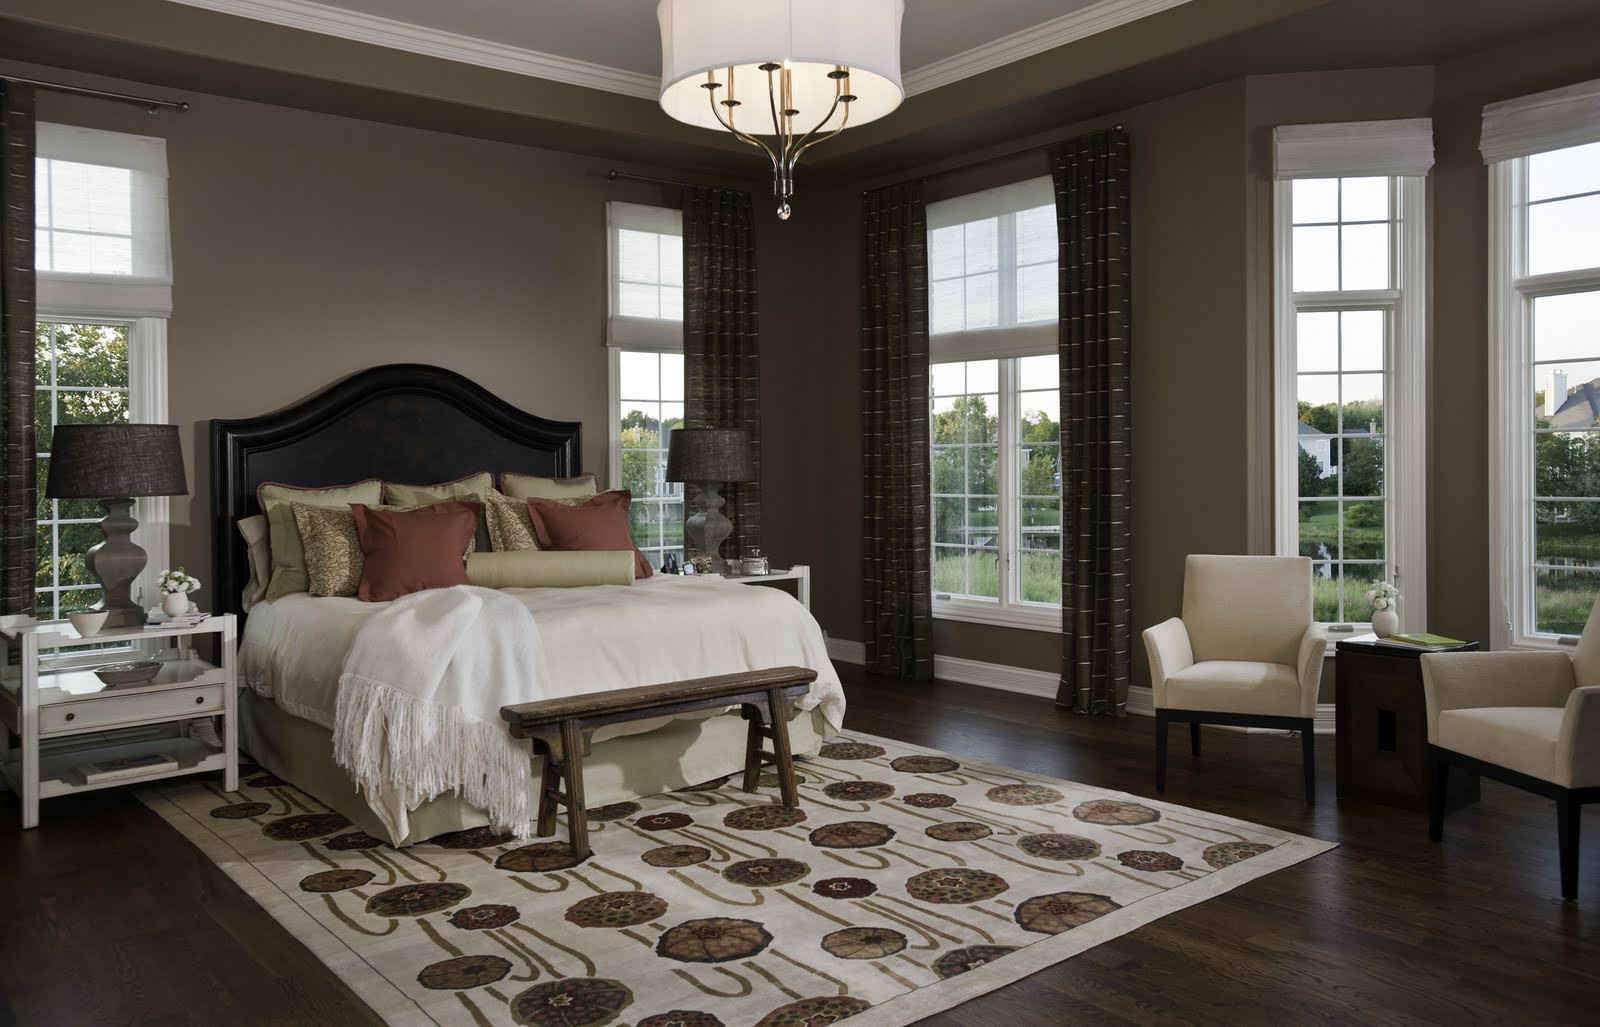 Master Bedroom Window Treatments
 Best Window Treatment Ideas and Designs for 2014 Qnud